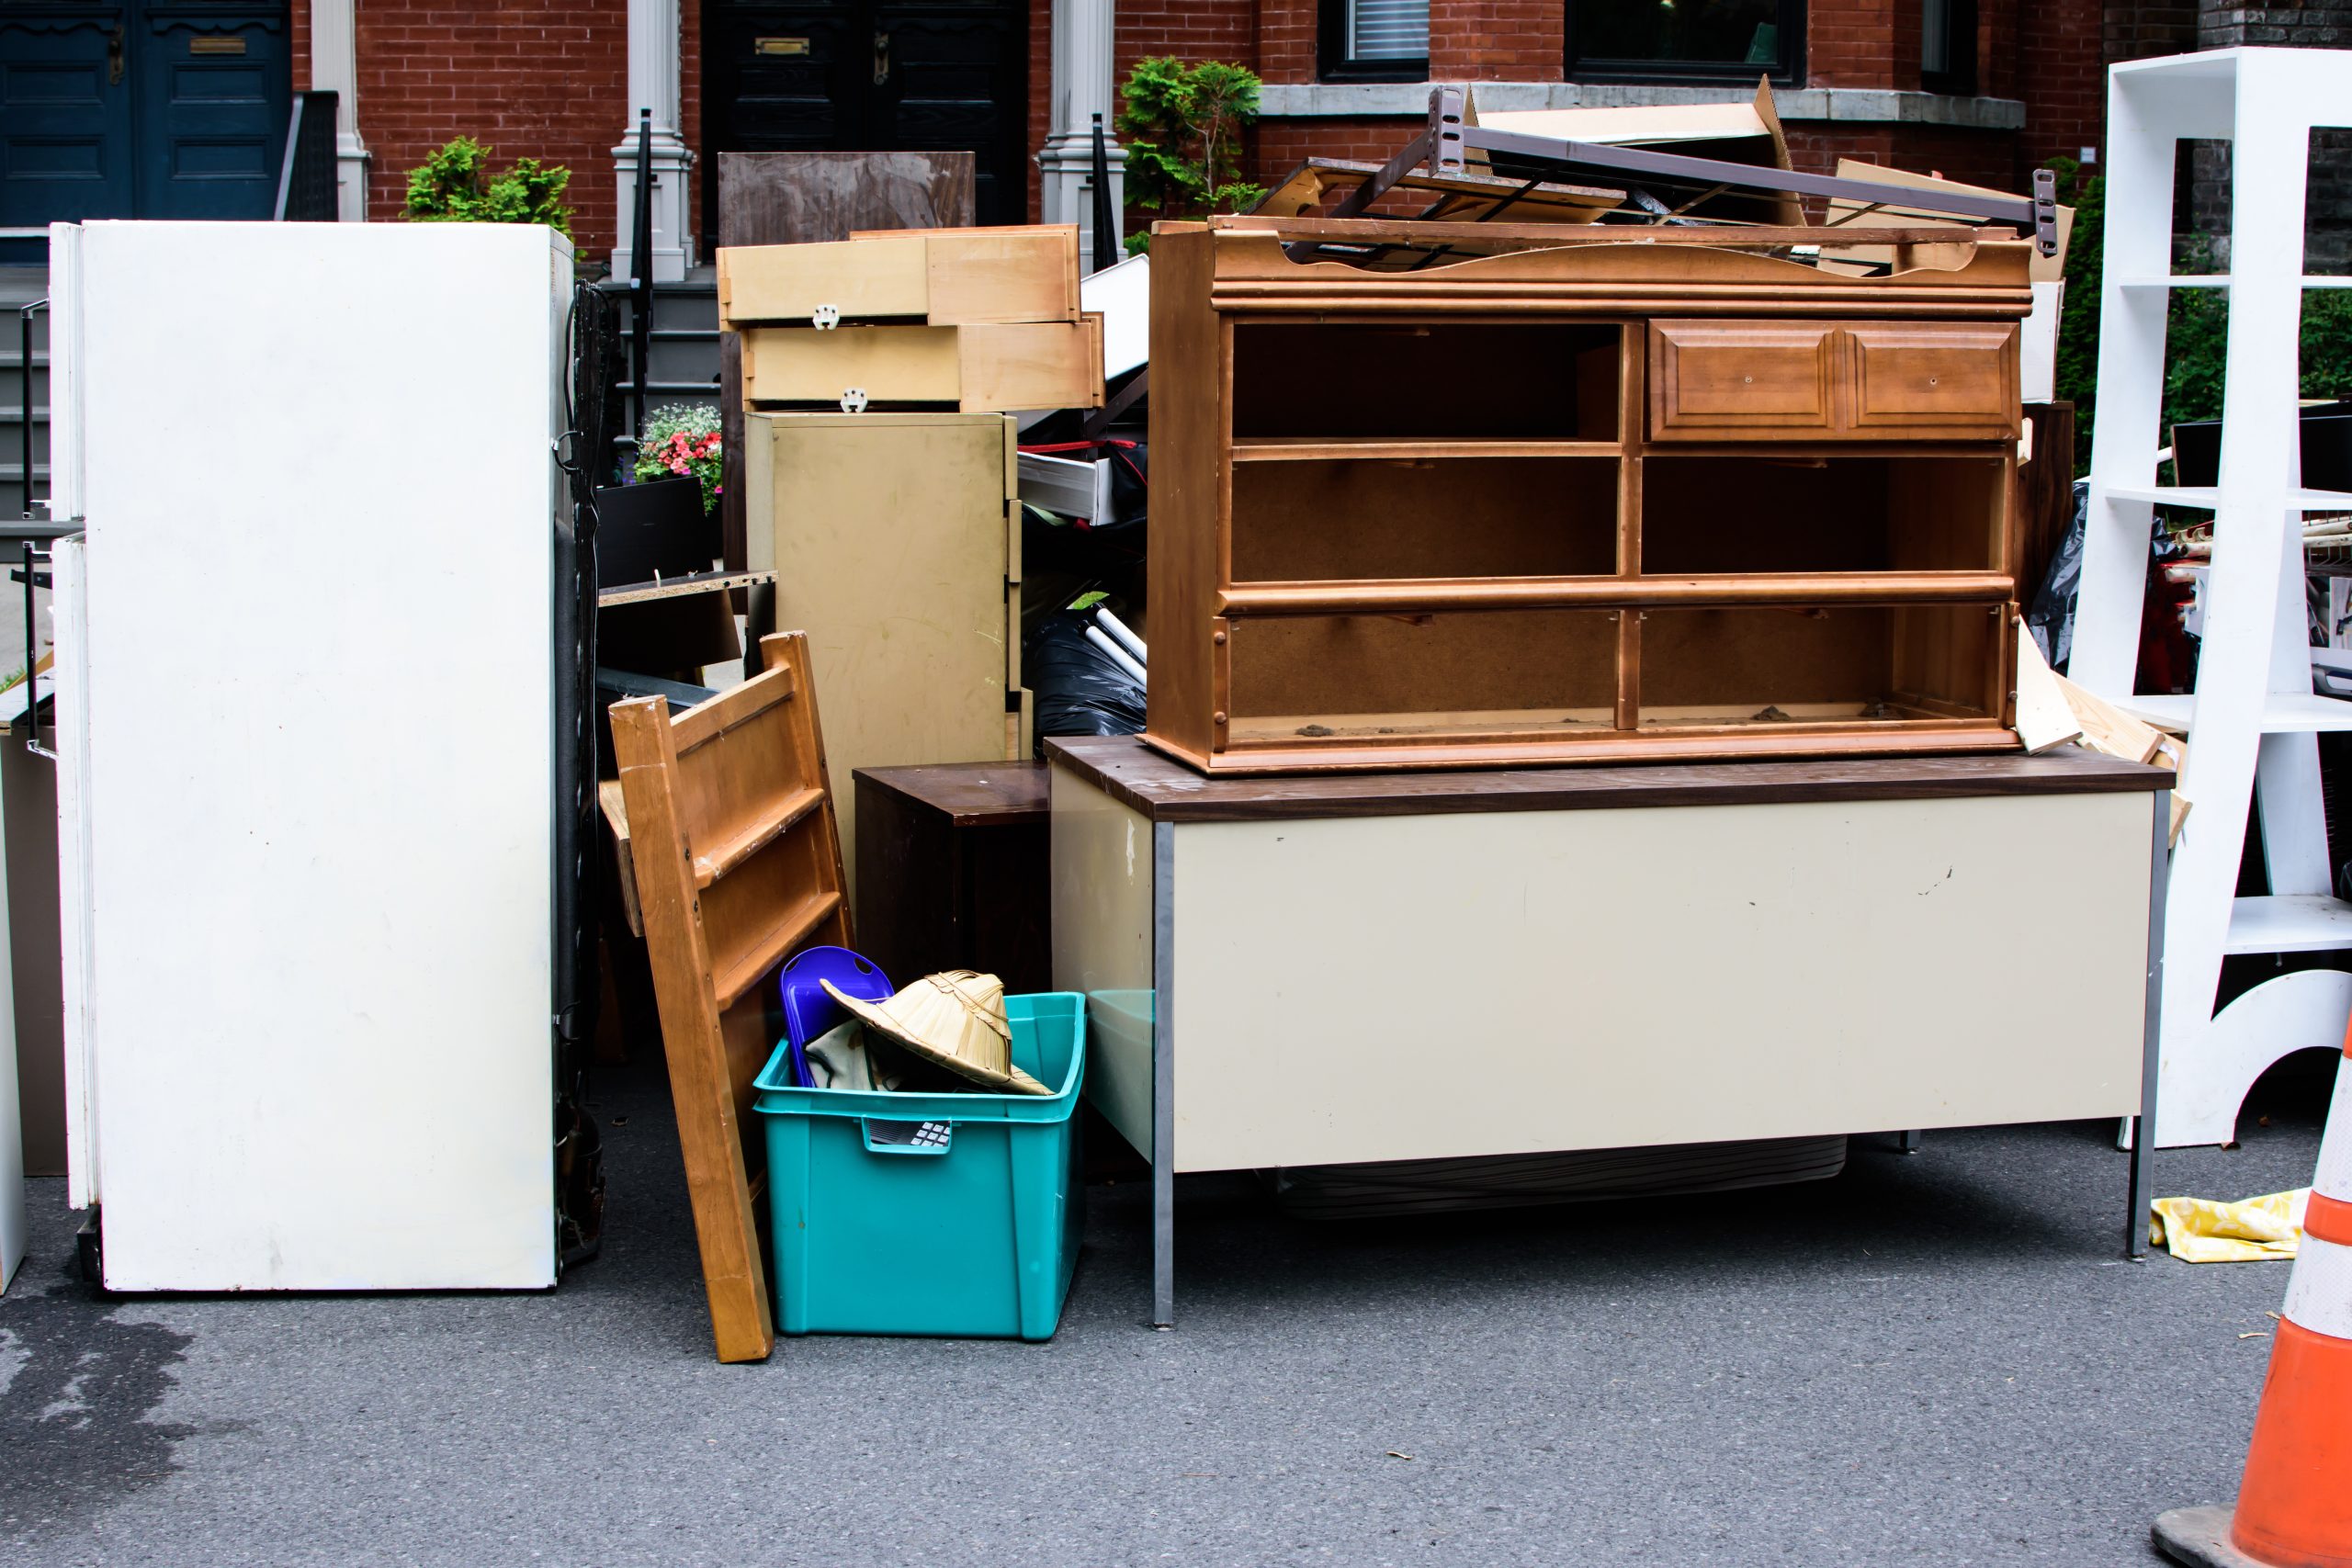 How do you dispose of items removed during an estate clean-out? faq - Estate Clean-out Services